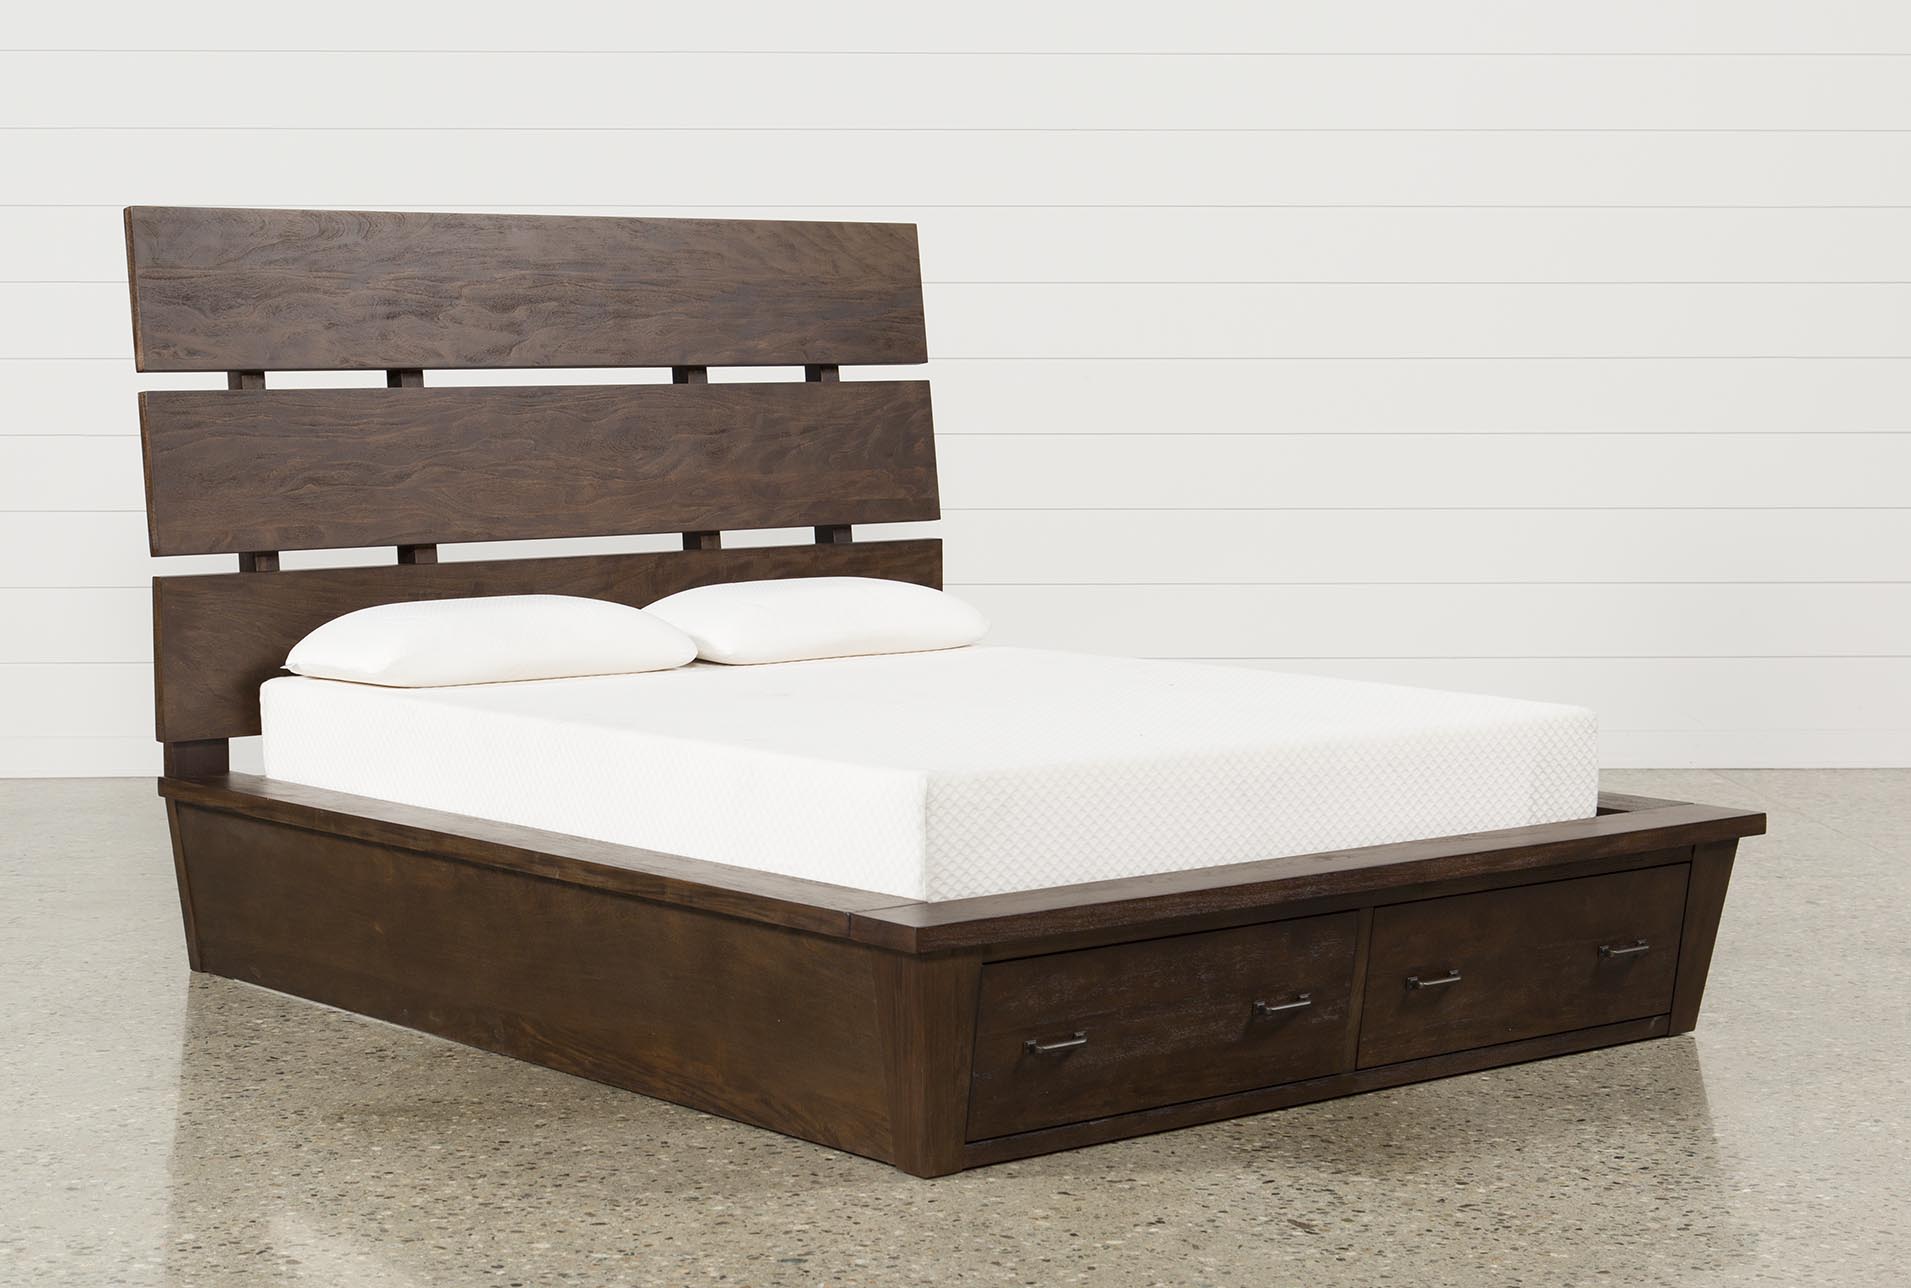 Livingston Queen Storage Bed (Qty: 1) has been successfully added to your  Cart.